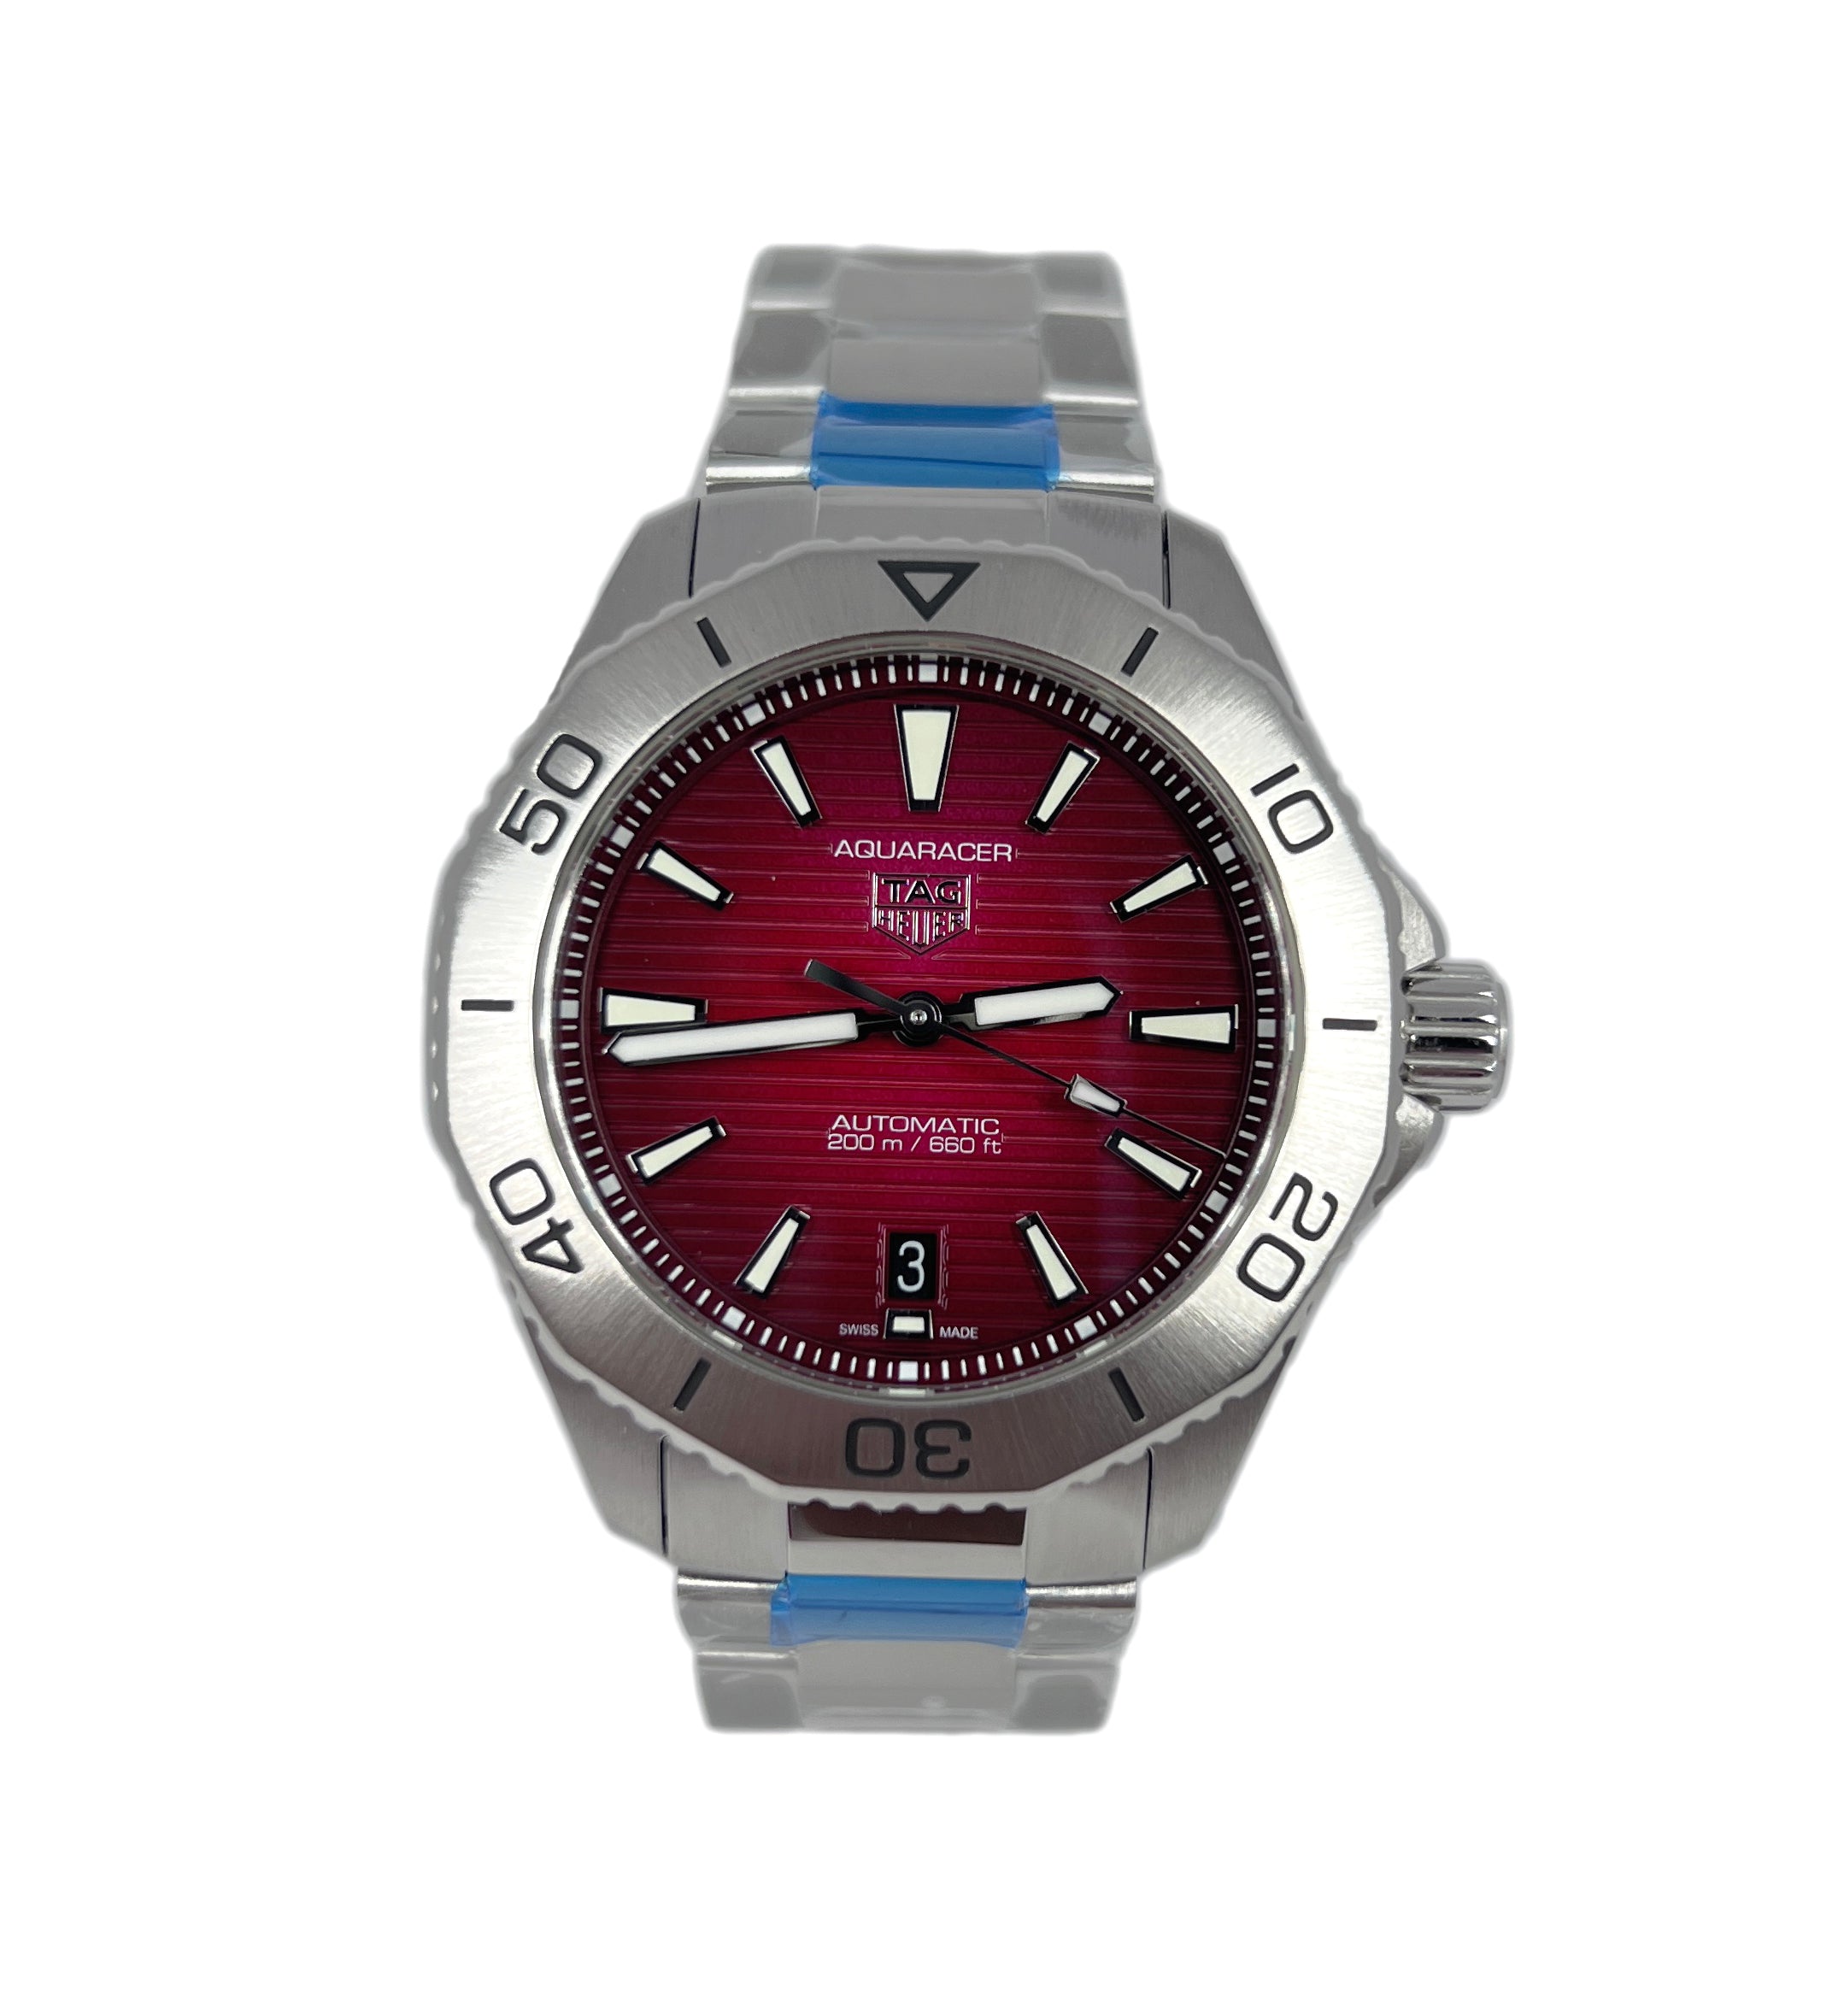 Tag Heuer Aquaracer Stainless Steel Men's Watch